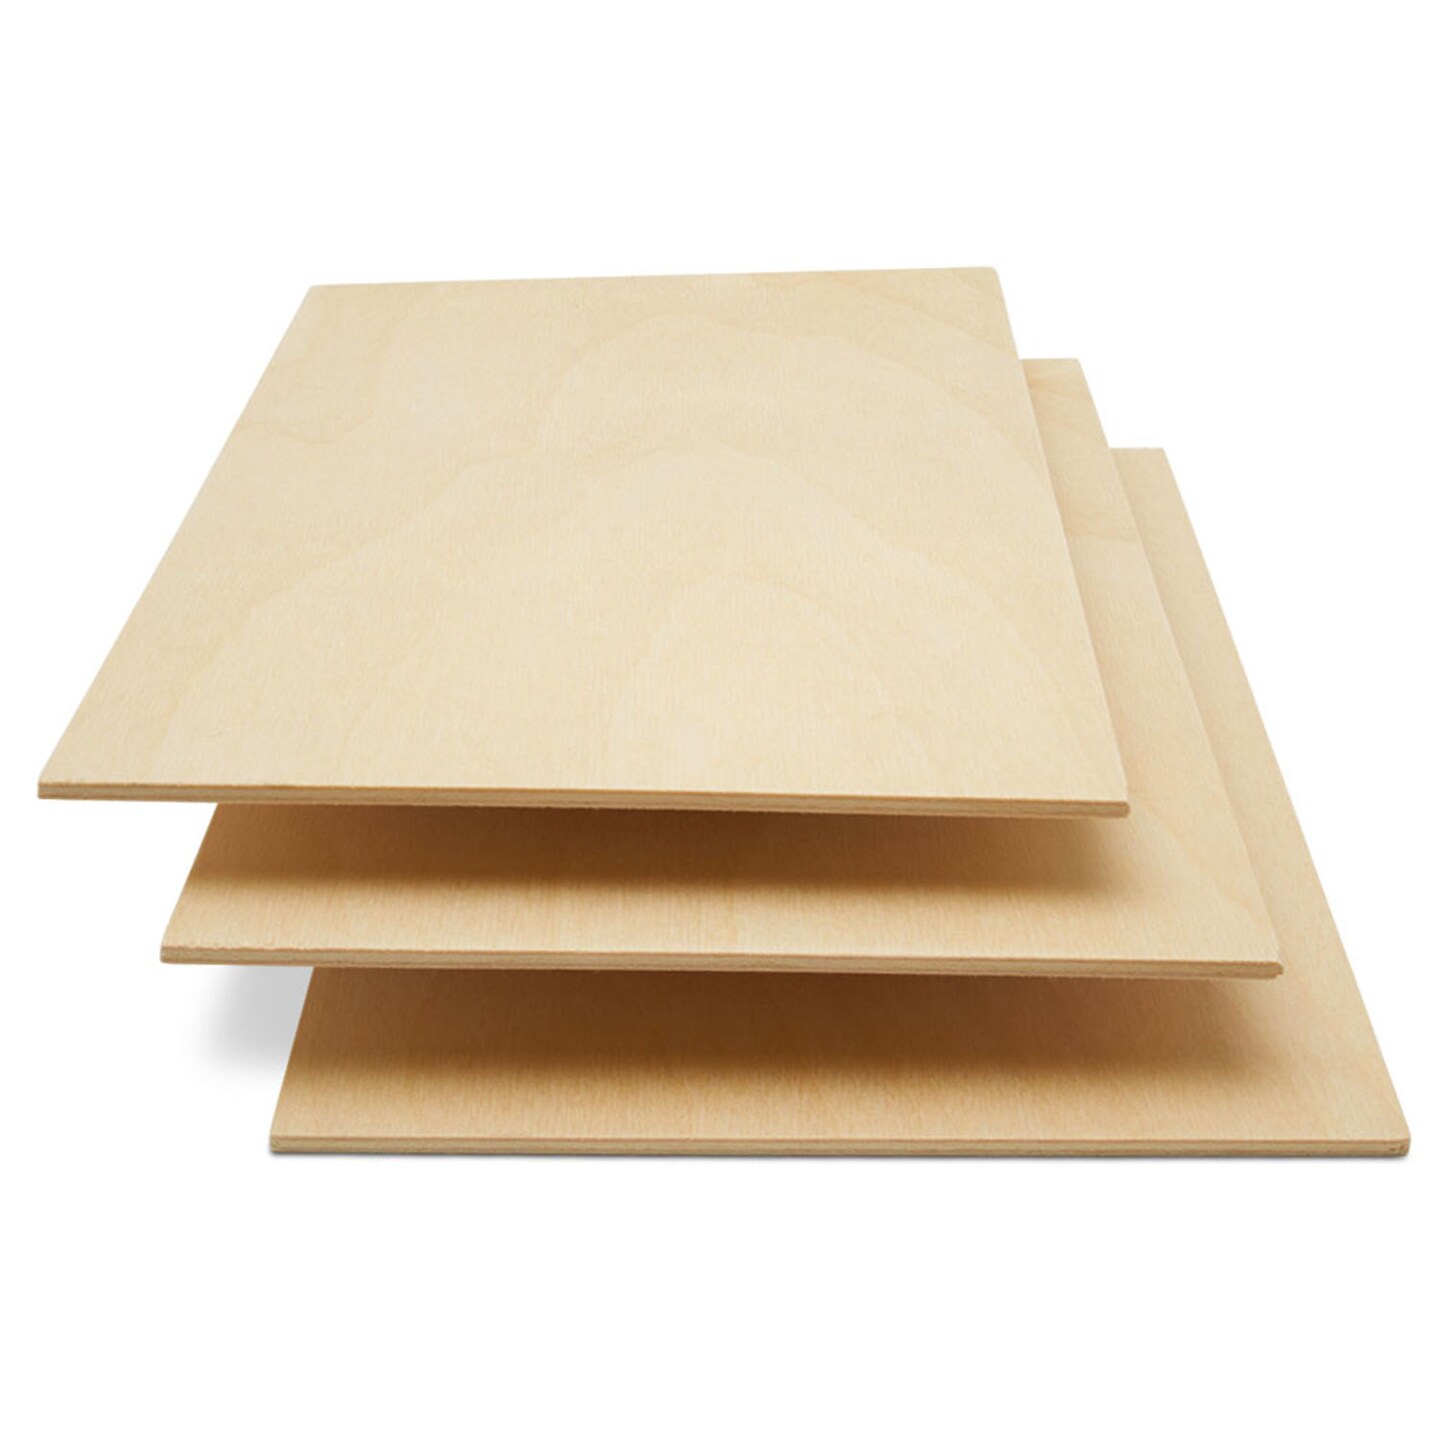 Baltic Birch Plywood, 8 x 8 Inch, B/BB Grade Sheets, 1/4 or 1/8 Inch Thick, Woodpeckers